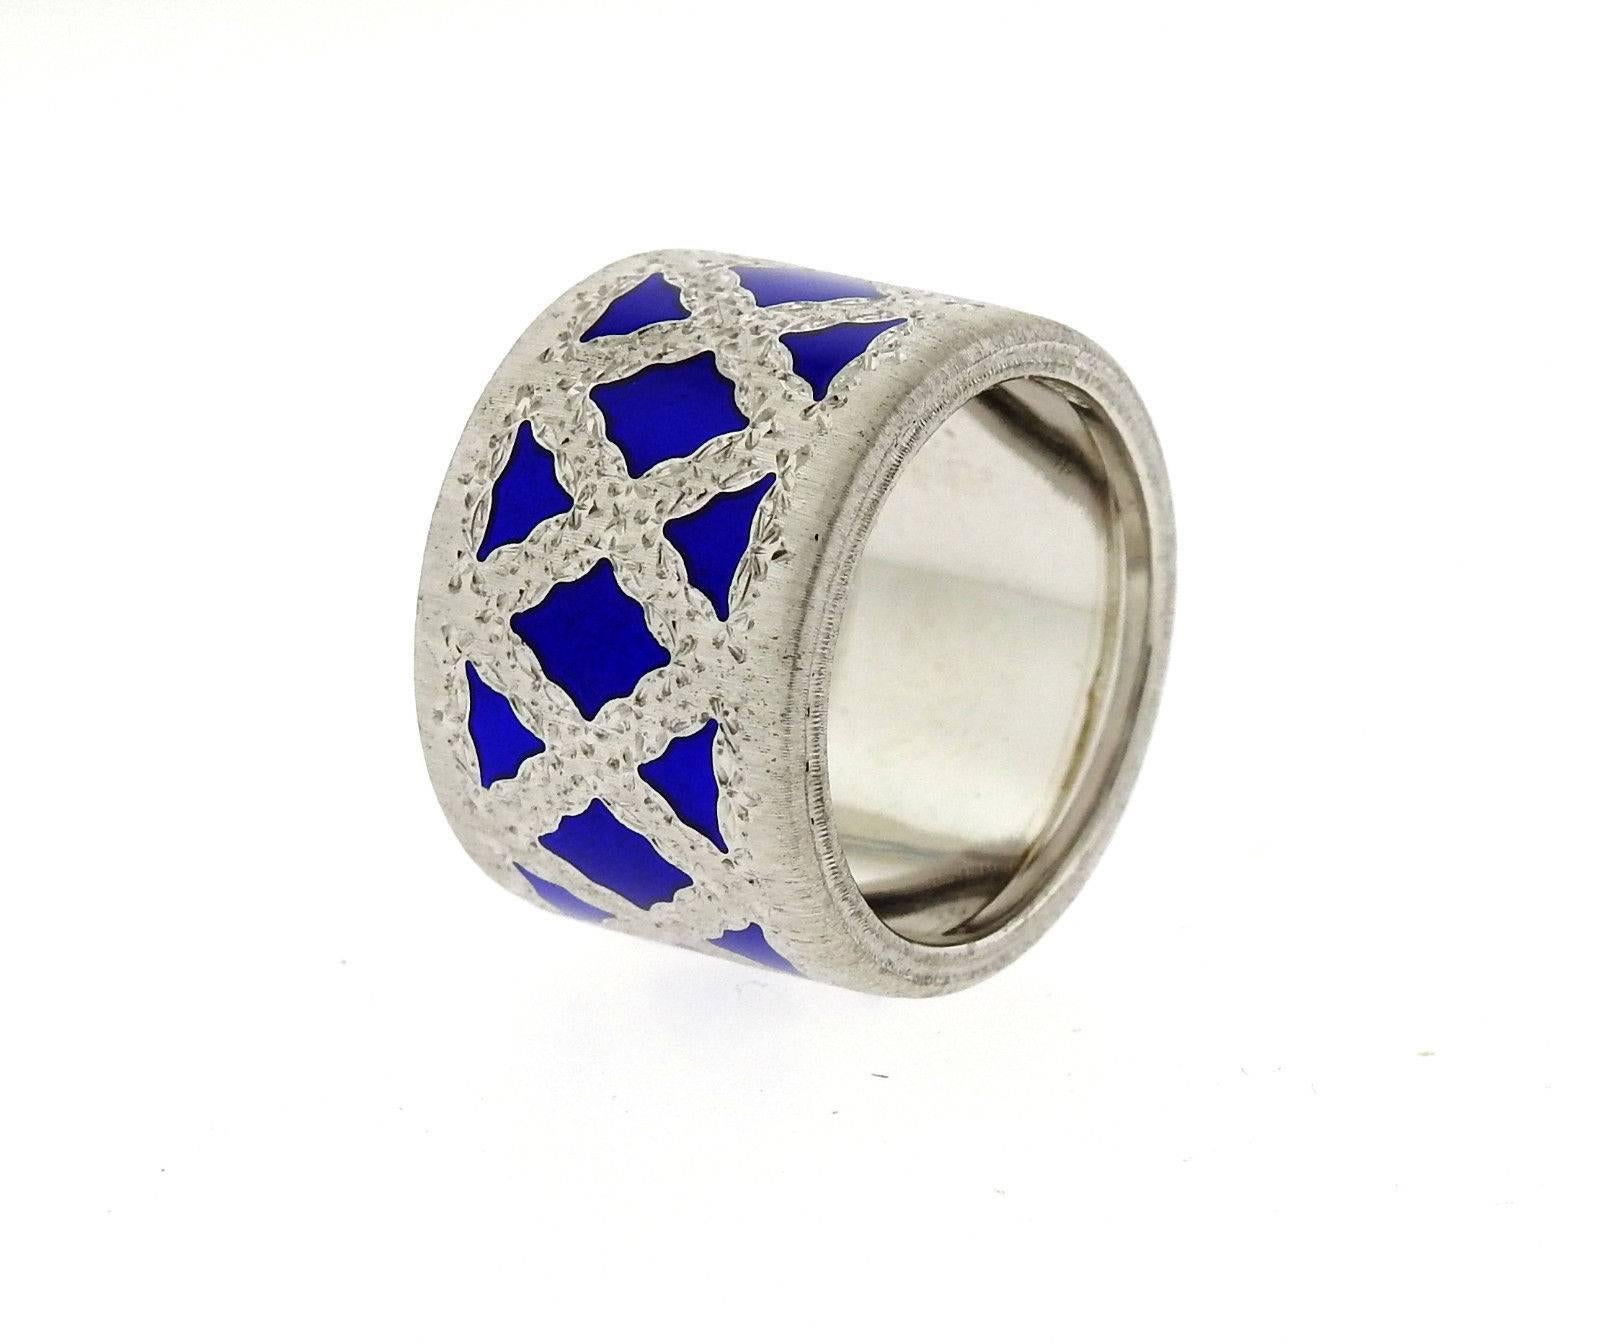 A sterling silver ring adorned with blue enamel.  The ring is a size 7 and is 14.8mm wide.  Marked: Buccellati, Italy, 925.  The ring weighs 10 grams.